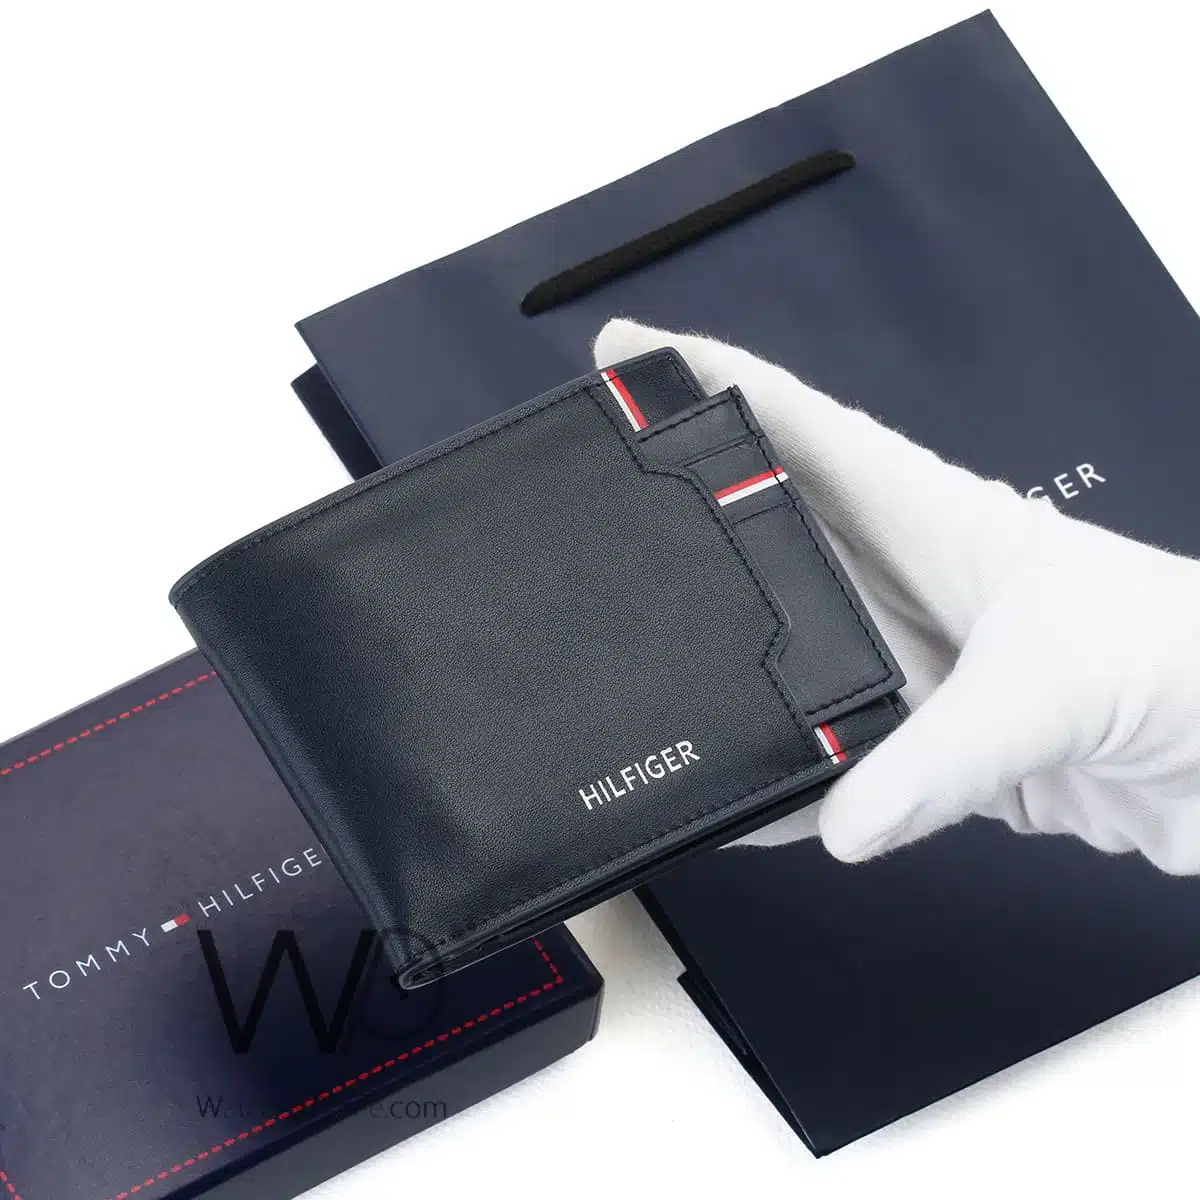 Tommy Wallet Genuine Leather Navy Blue Men | Watches Prime